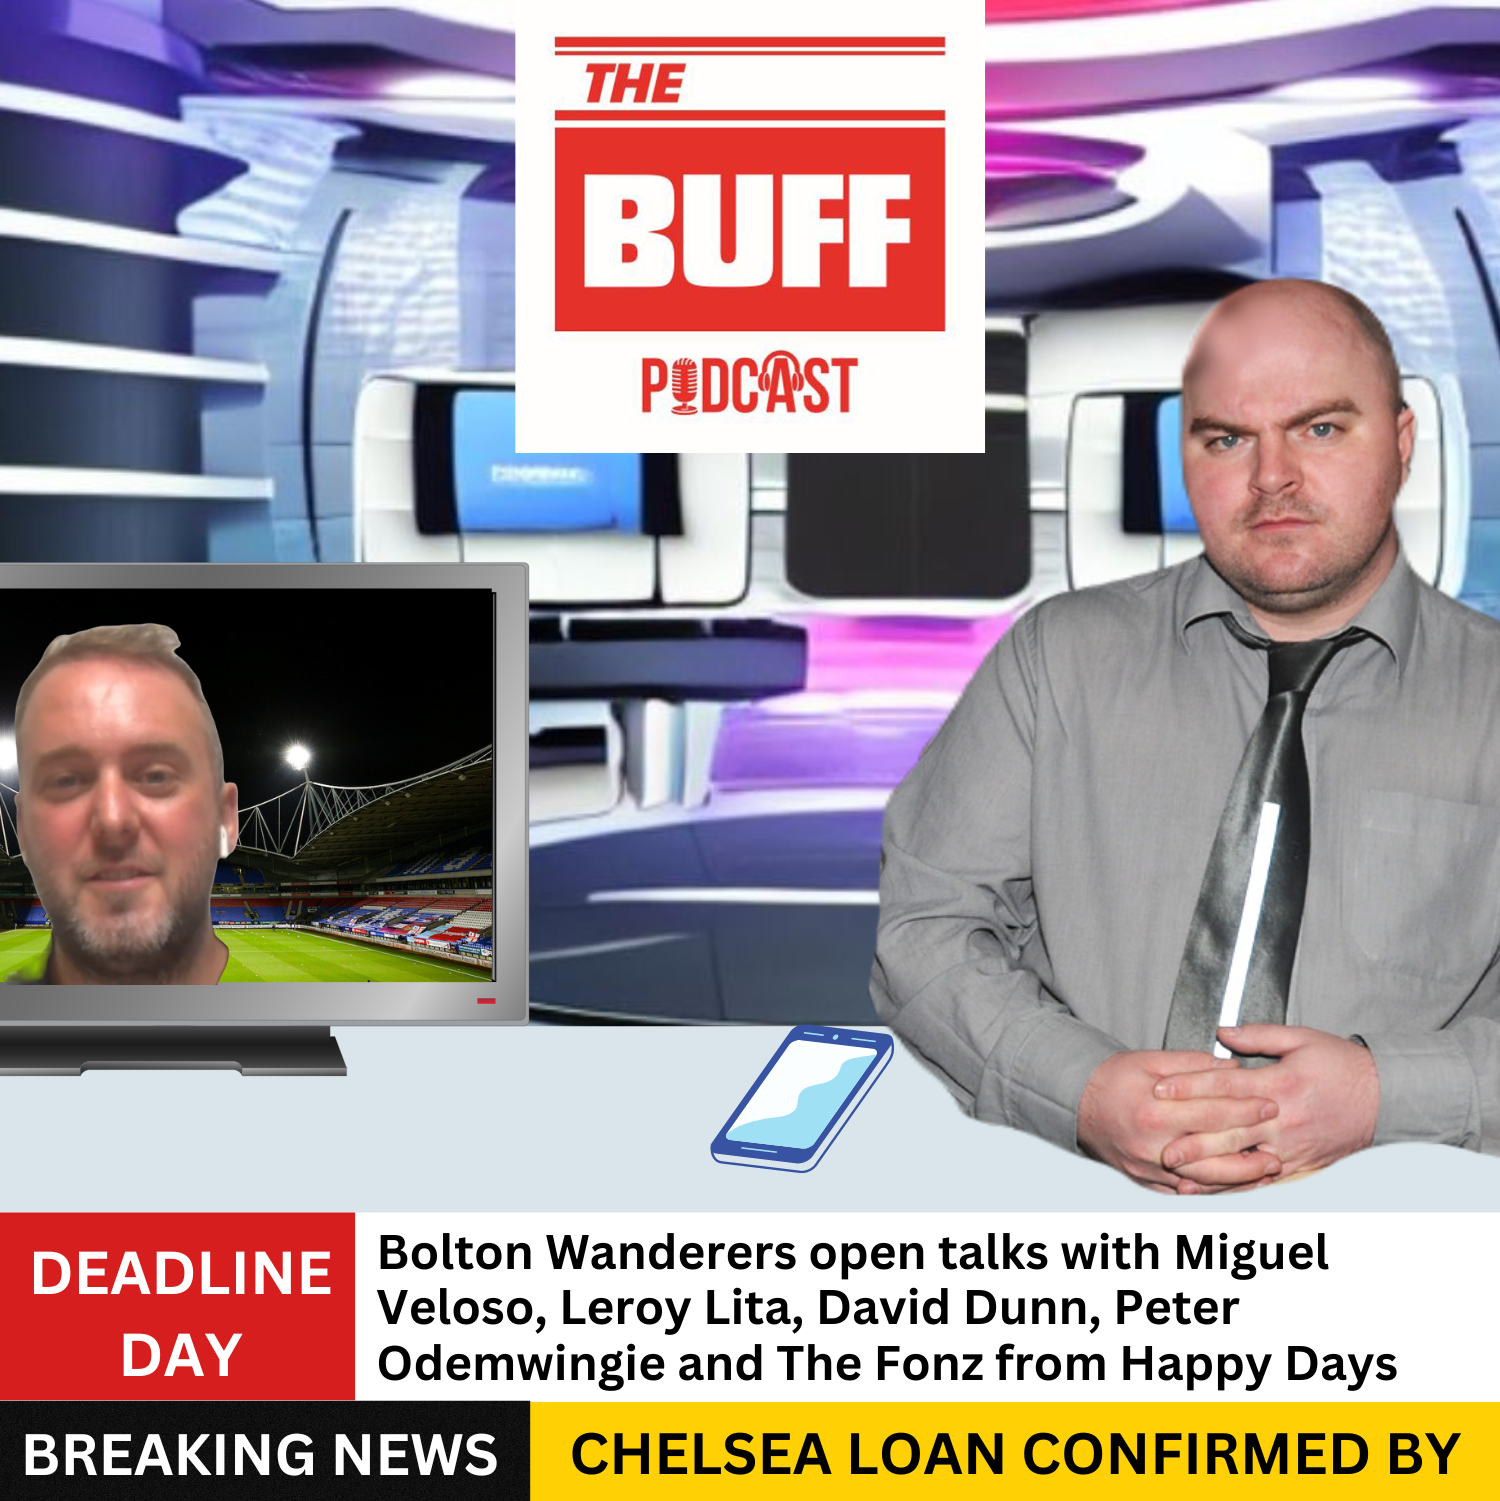 Deadline Day, Derby and the De rest of the show